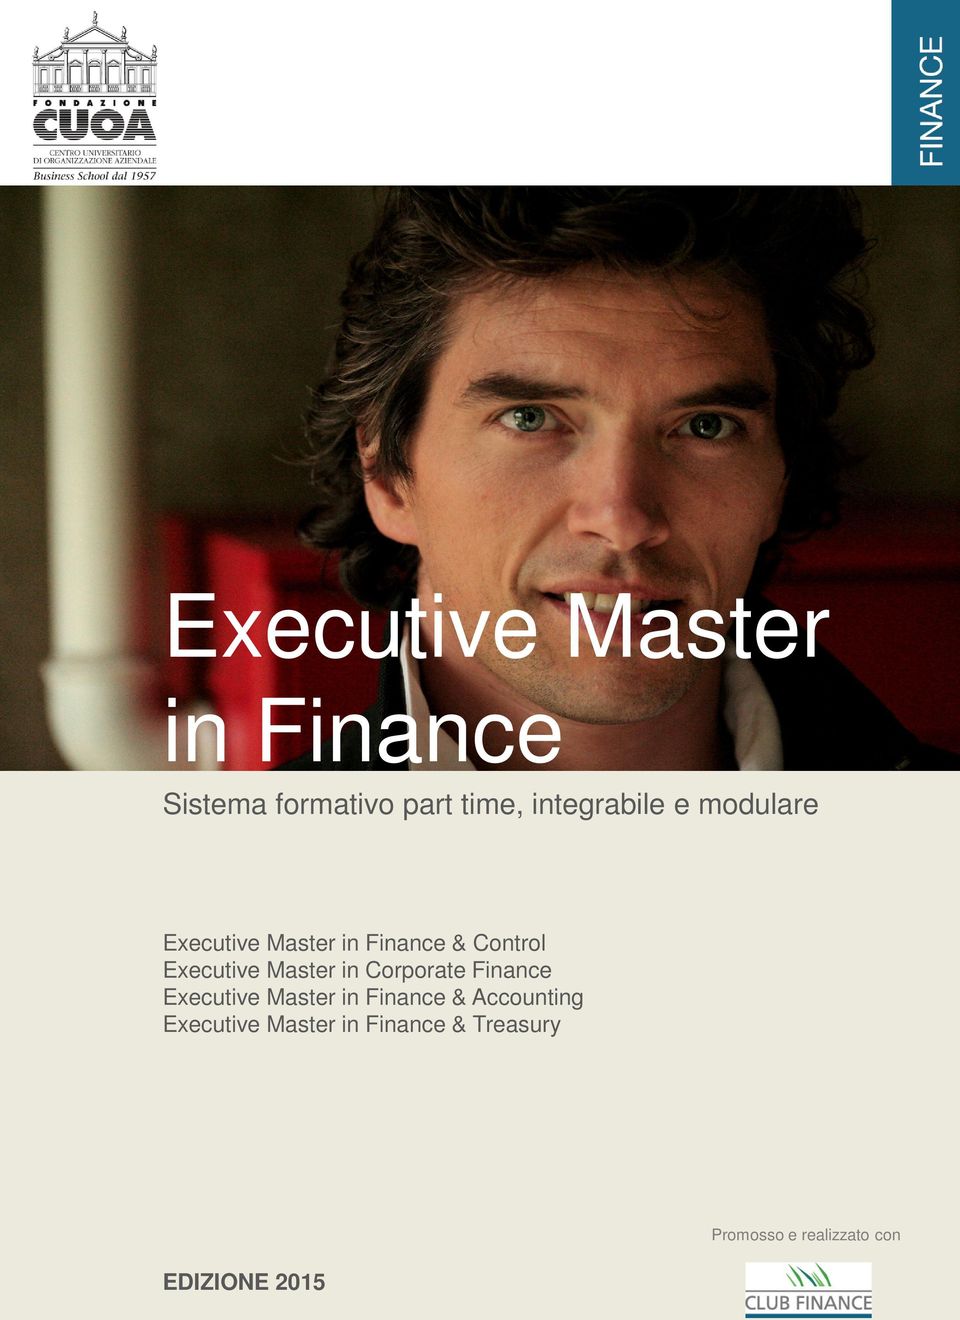 Corporate Finance Executive Master in Finance & Accounting Executive